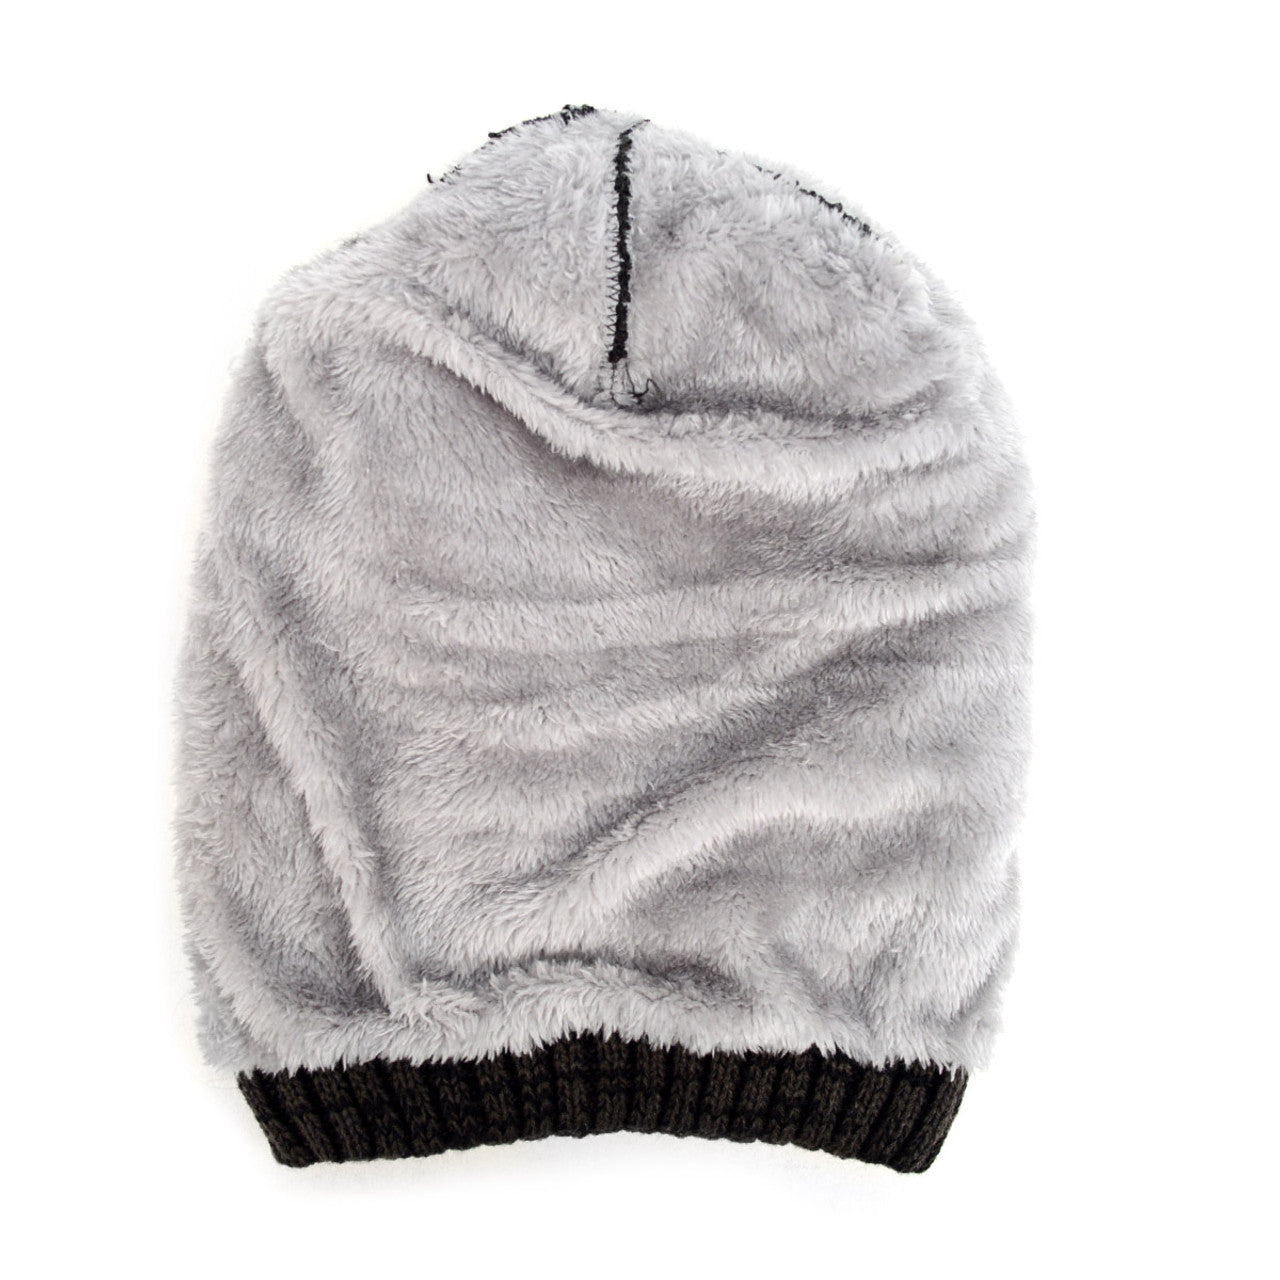 Slouchy Oversized Baggy Winter Beanie Hat Manitoba - Hue fra FOEMO hos The Prince Webshop